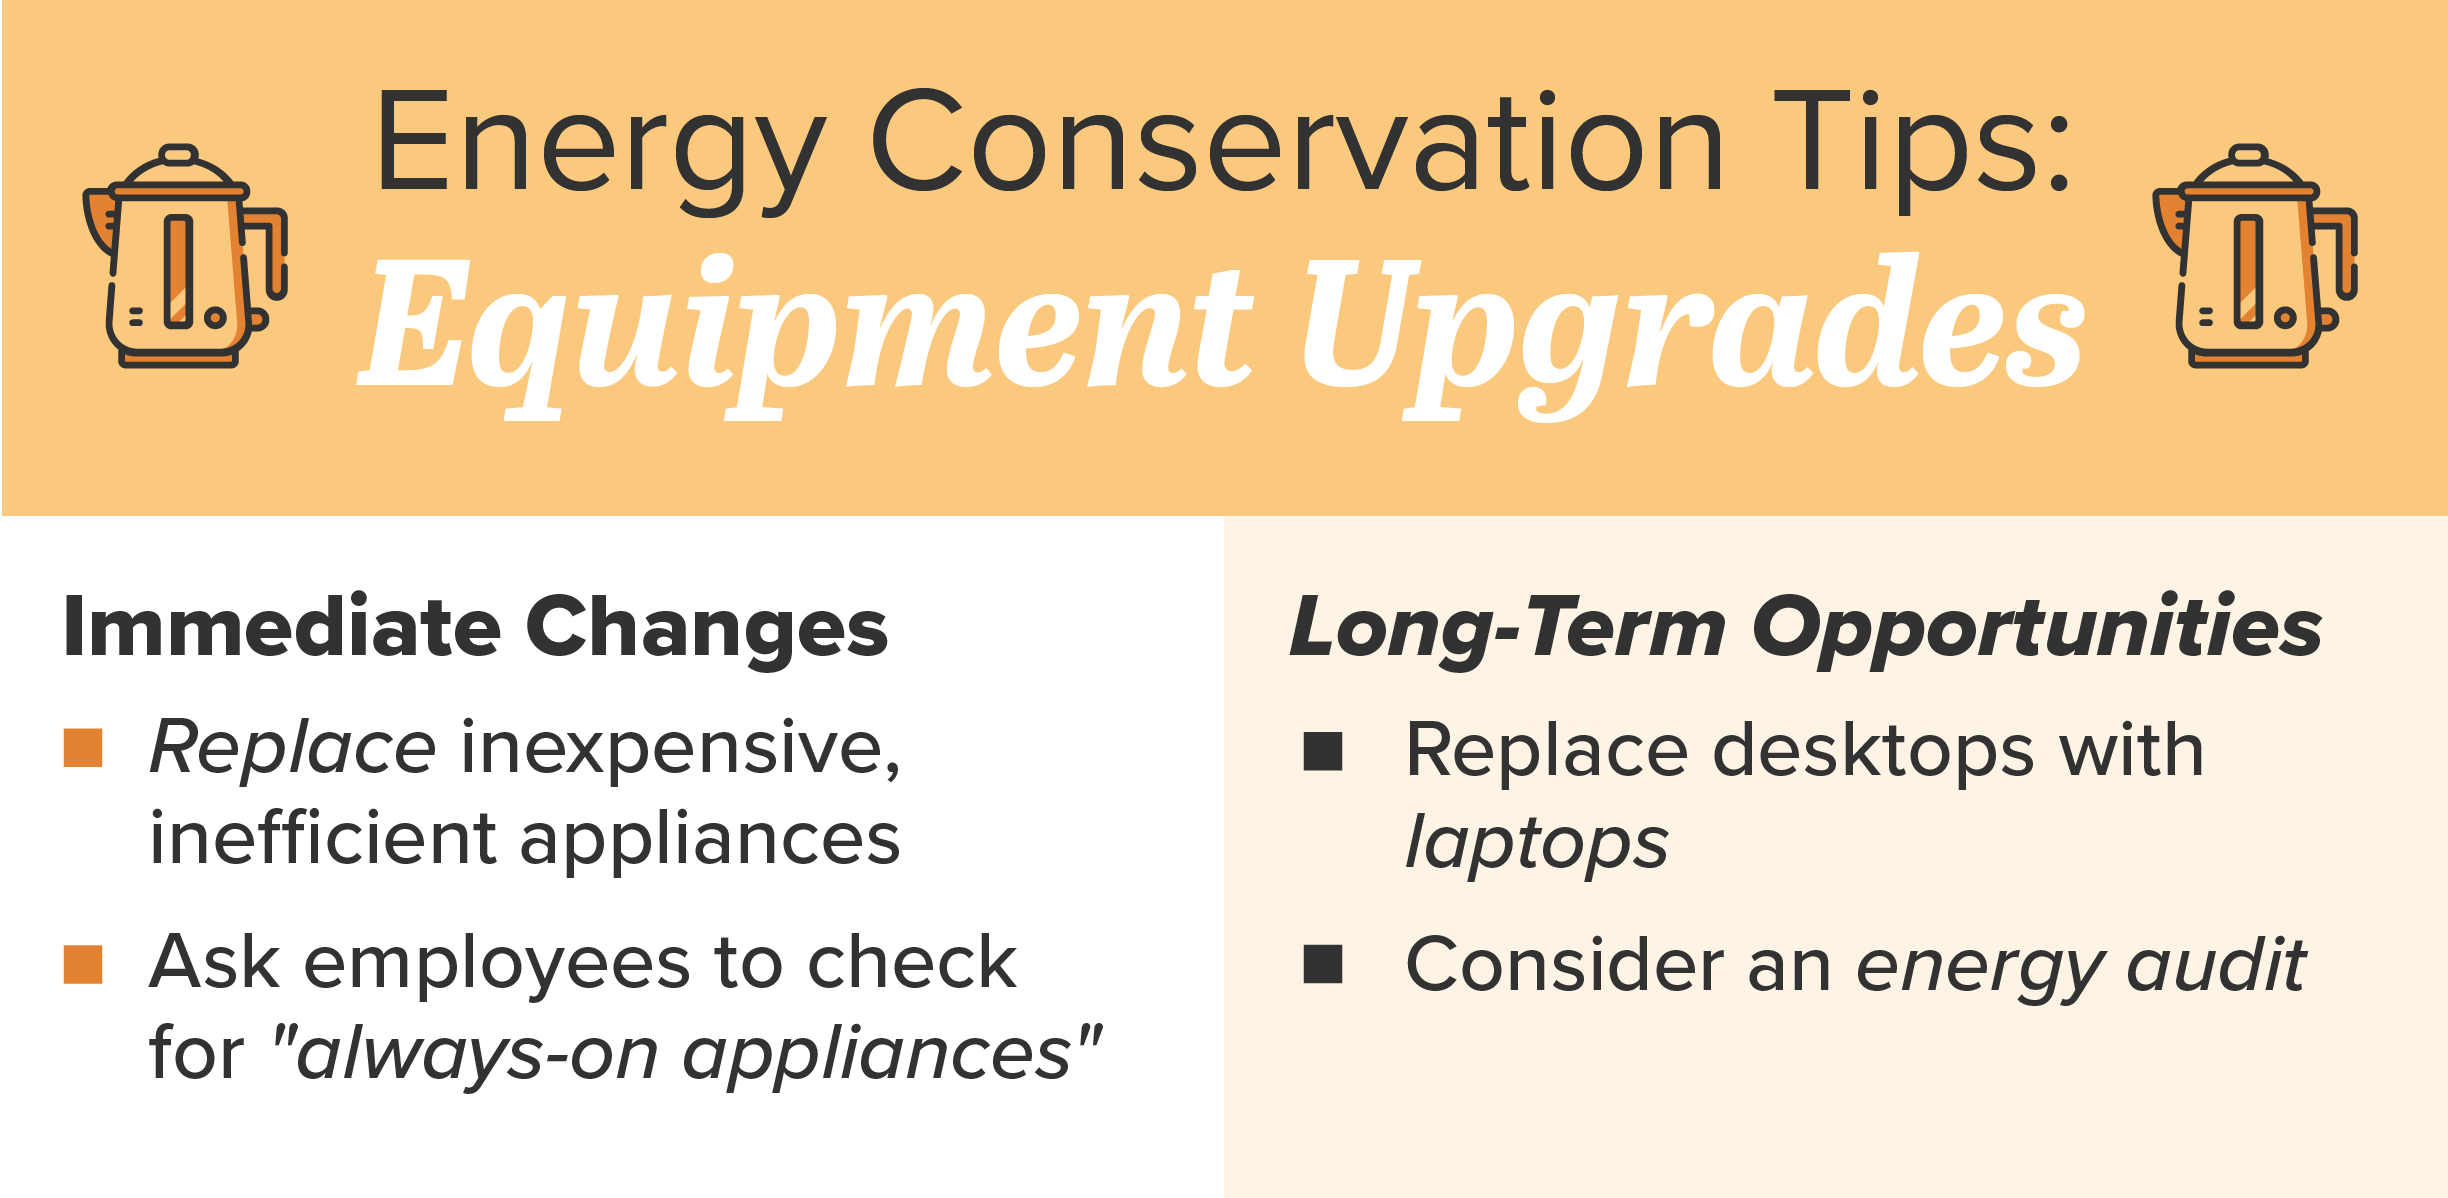 Equipment upgrade conservation tips